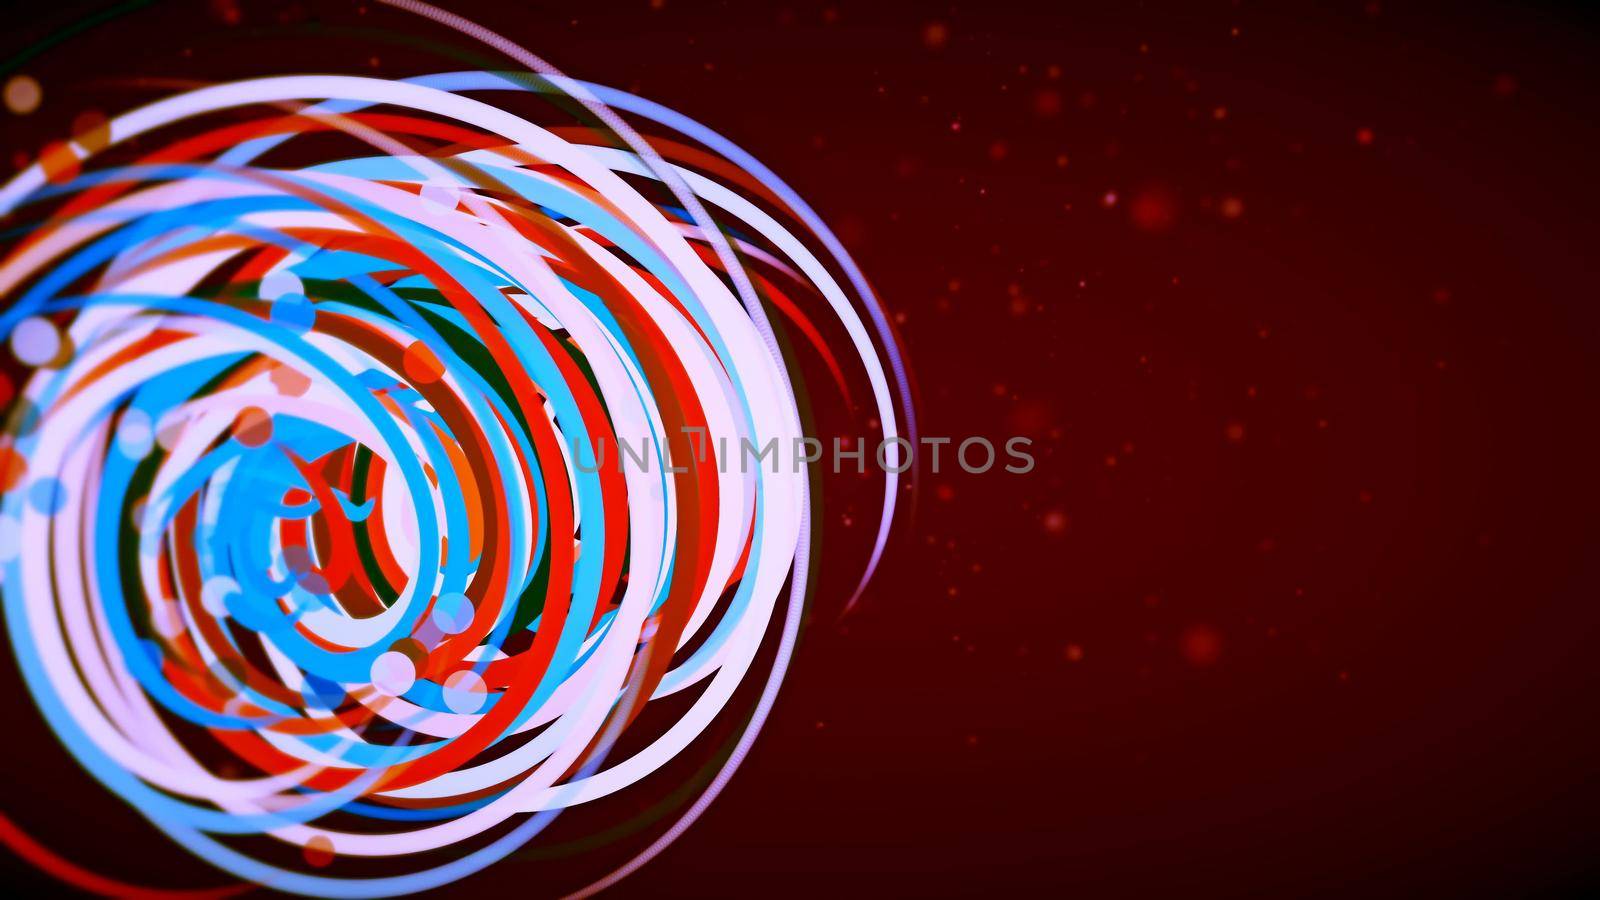 Abstract CGI graphics with colored spiral